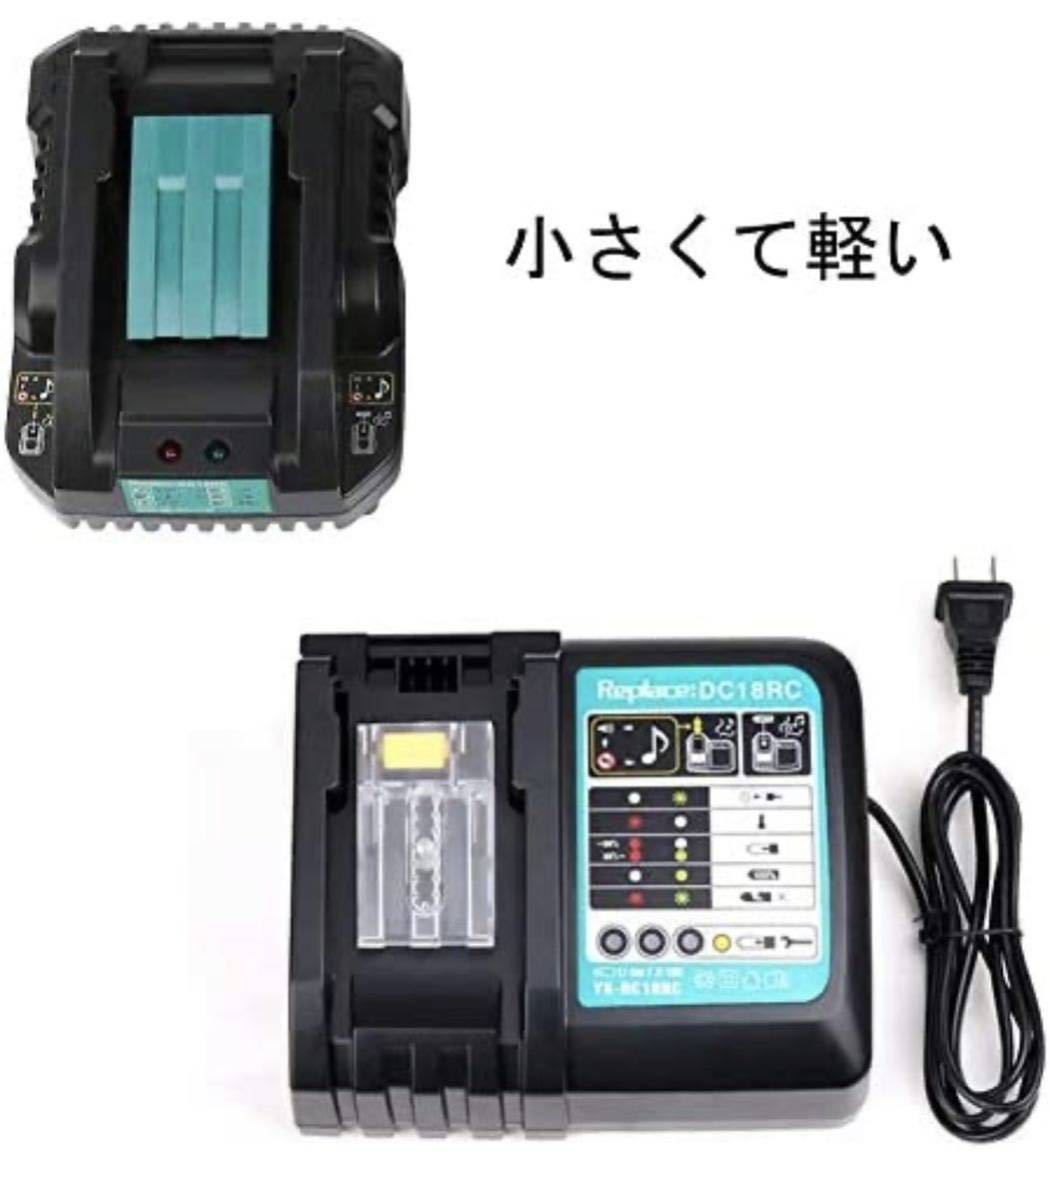  Makita interchangeable charger DC18RC fast charger interchangeable goods makita Makita charger battery DIY ( small size type ) 14.4v 18v correspondence BL1860b